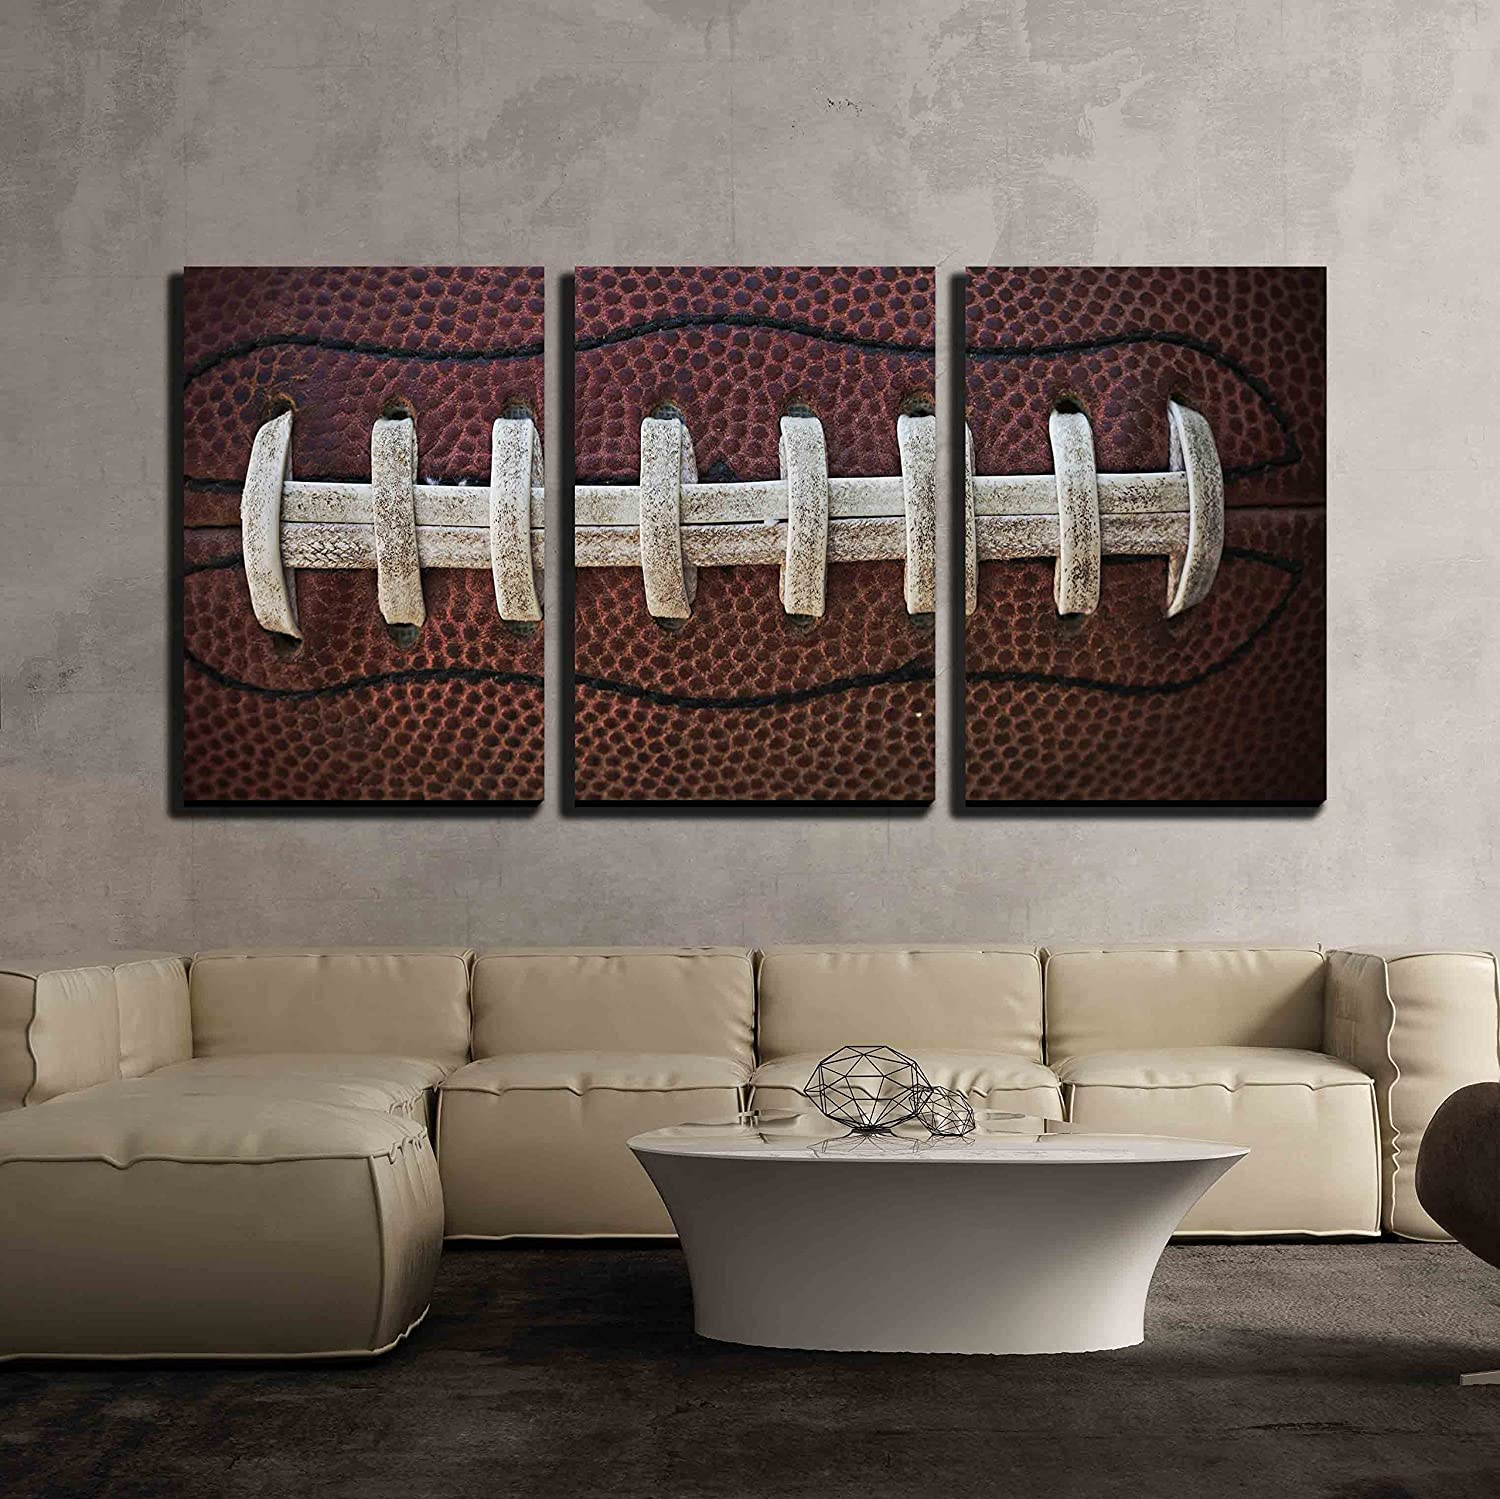 very classic artwork for a football themed room over a couch